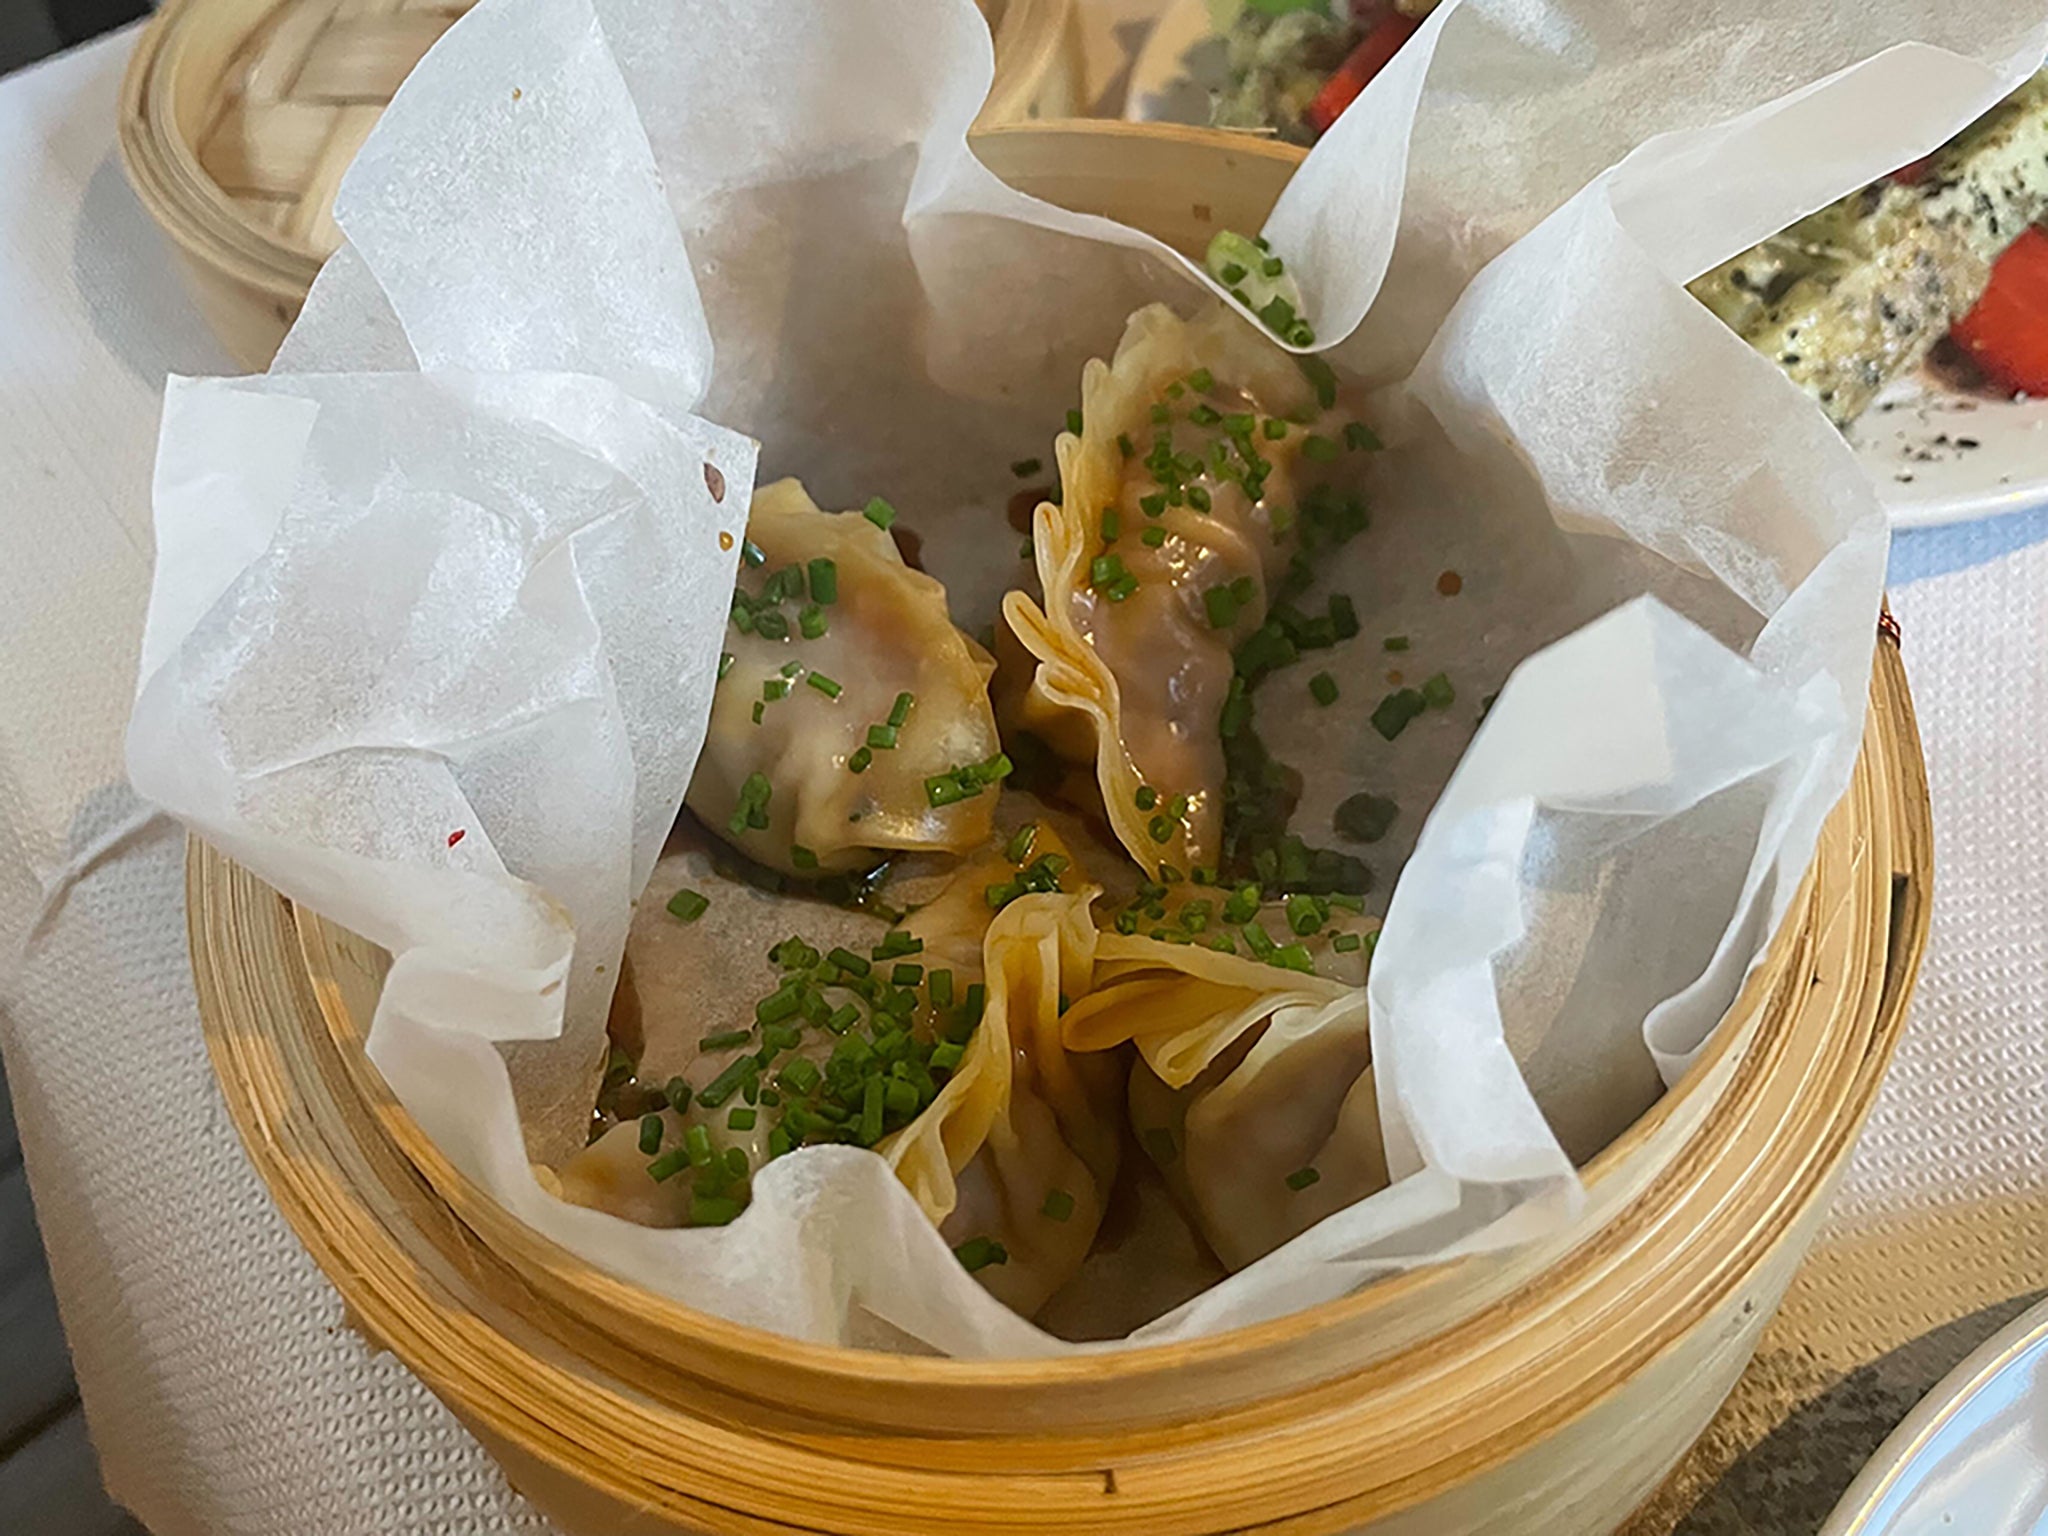 Full steam ahead: the dumpling fillings offer a mix of East Asian and British flavours